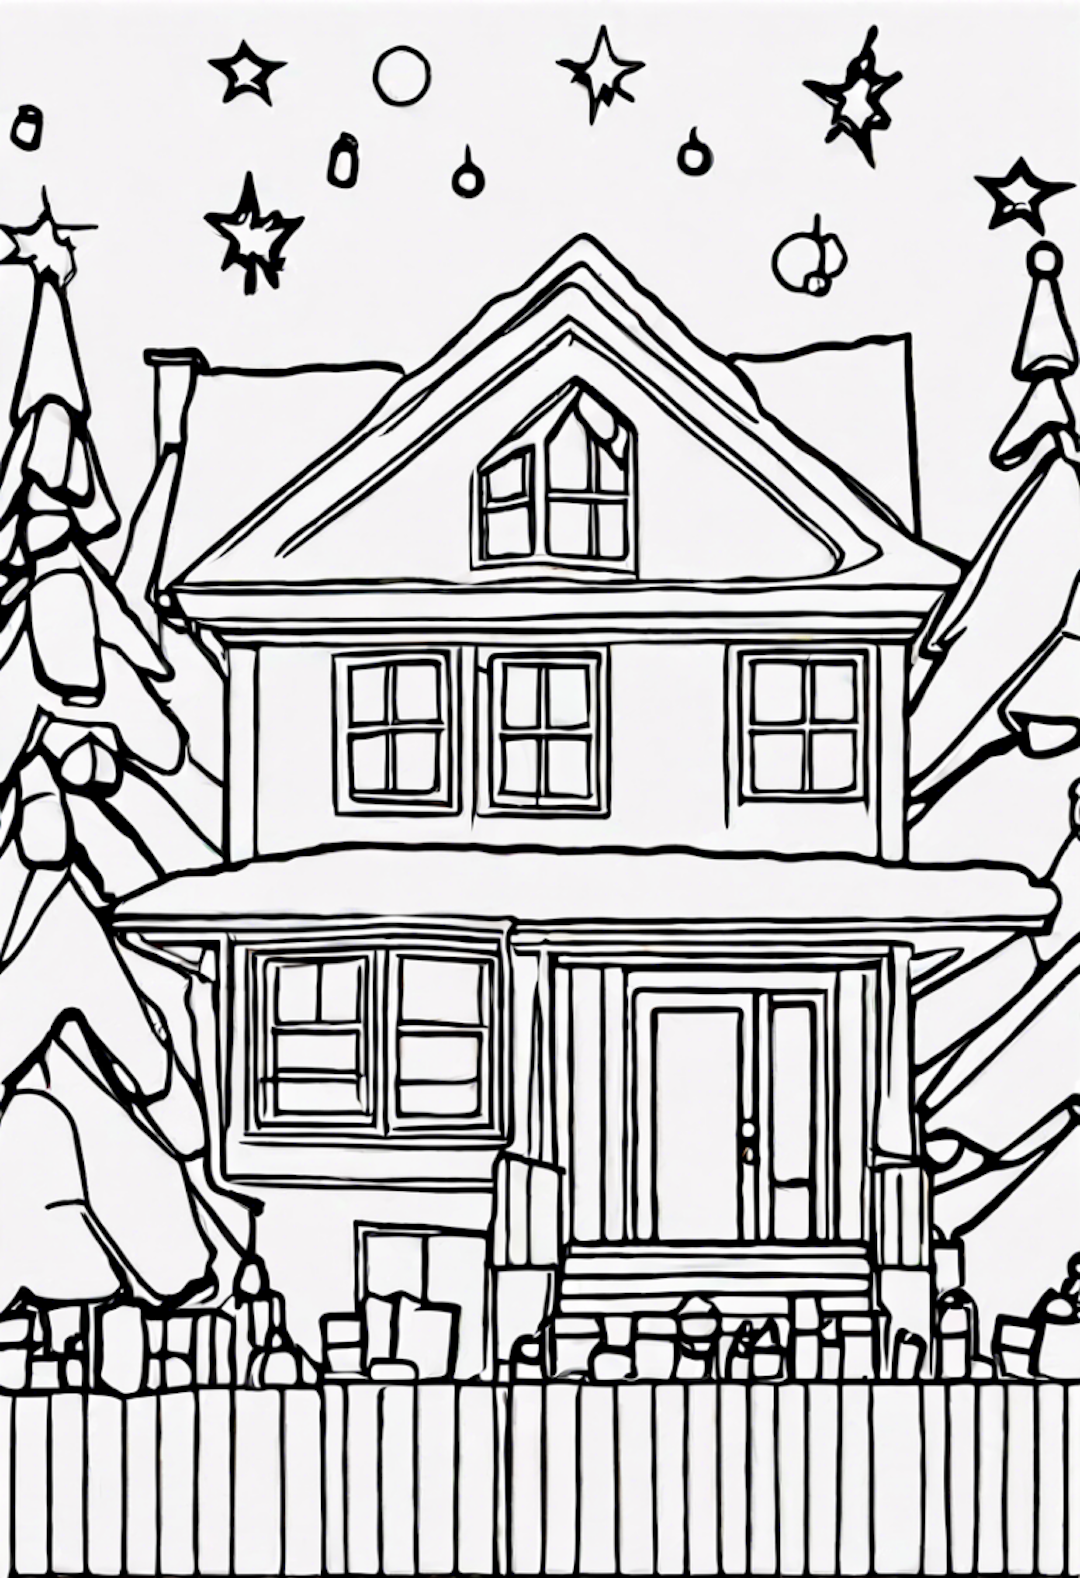 Christmas Lights On A House coloring pages